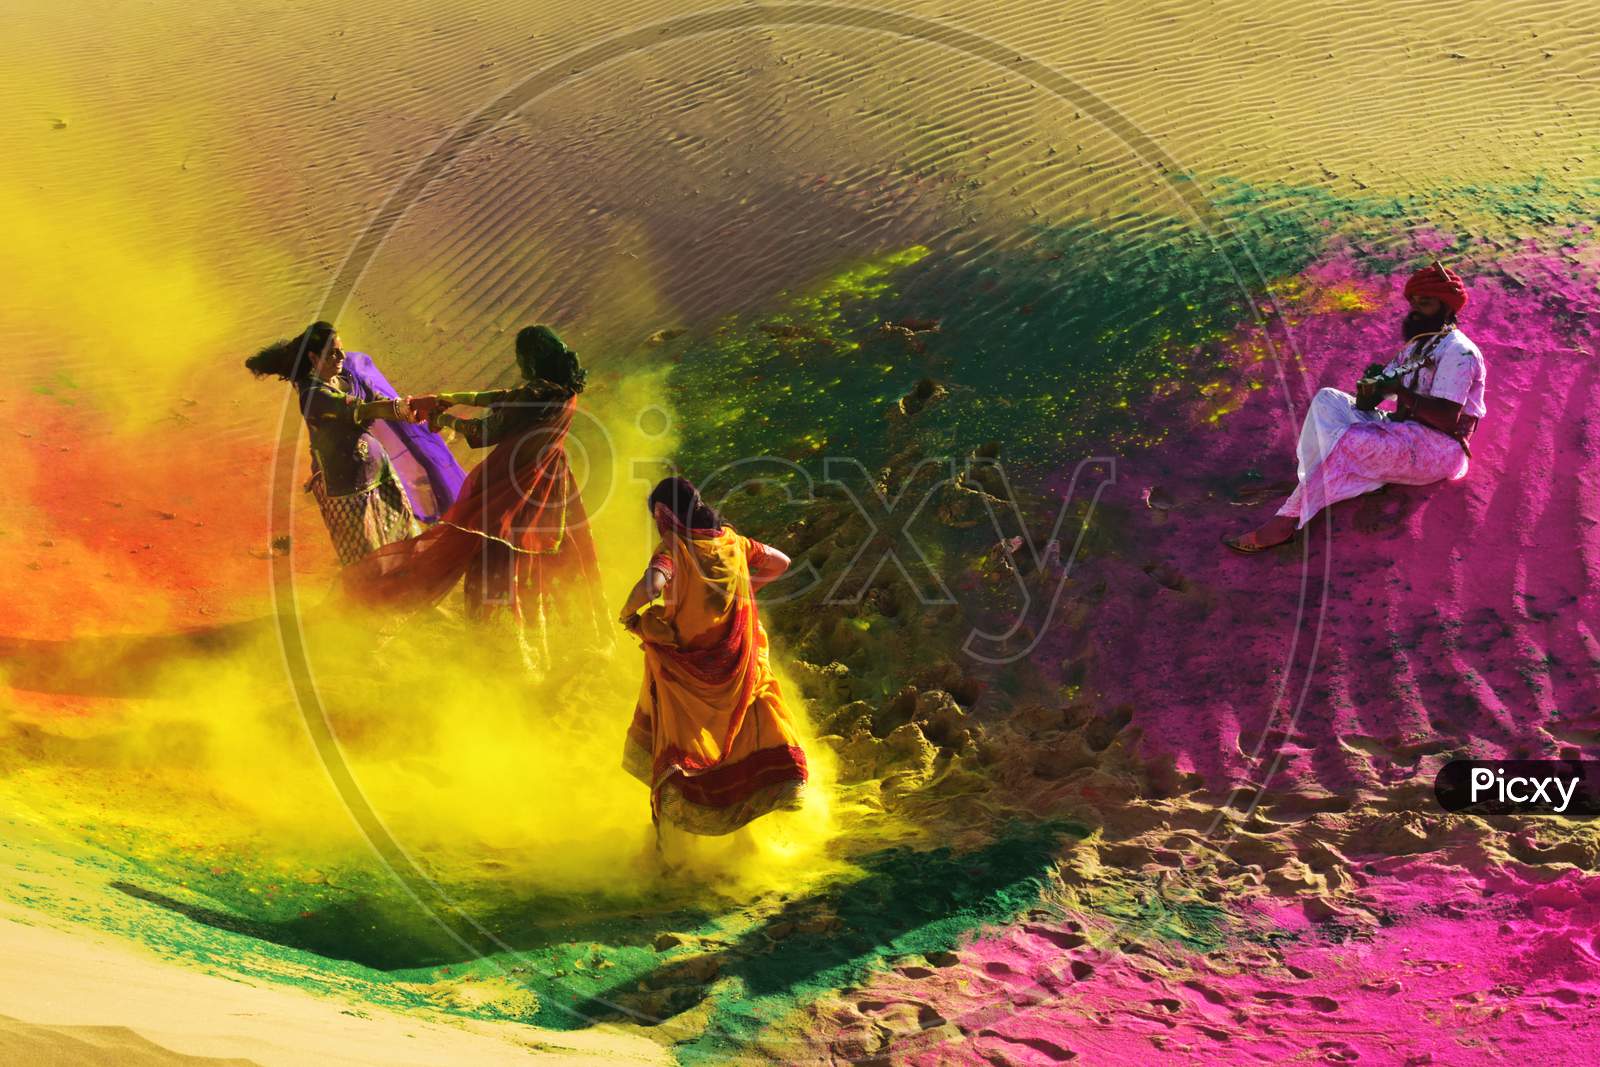 Two Girls And One Man Celebrating Holi, The Festival With Colors And Music